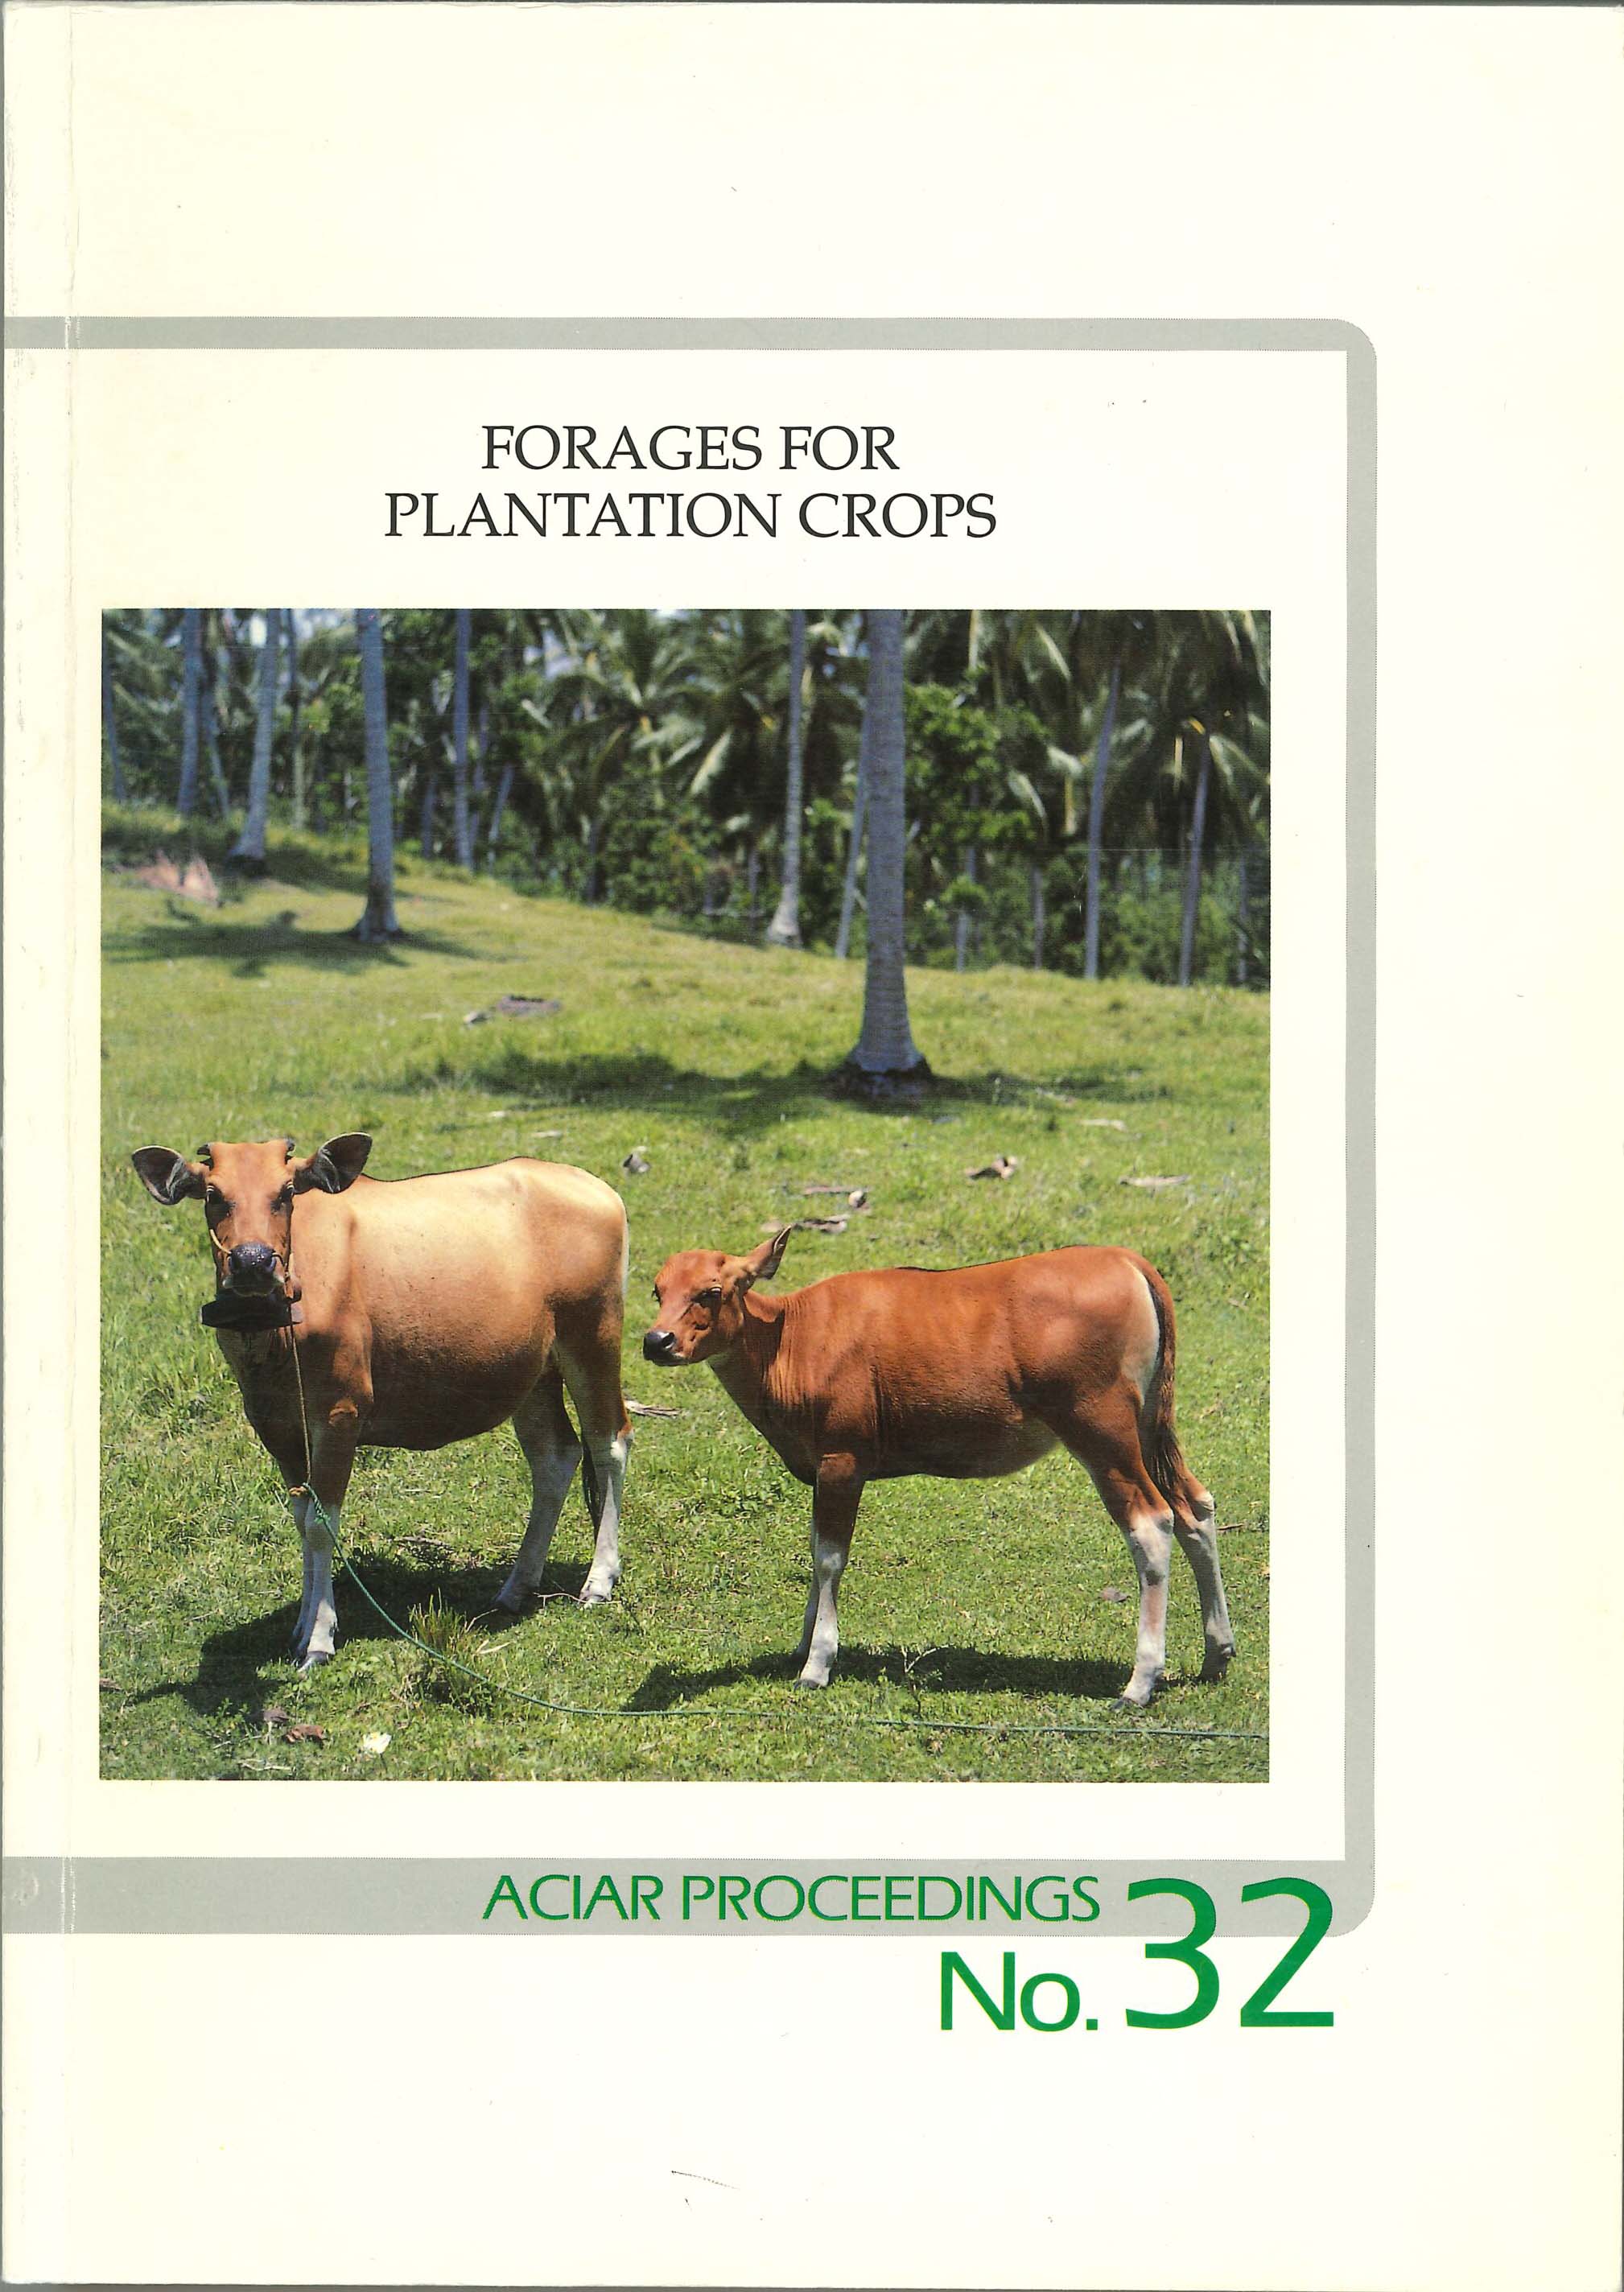 book cover shows two cows and titles